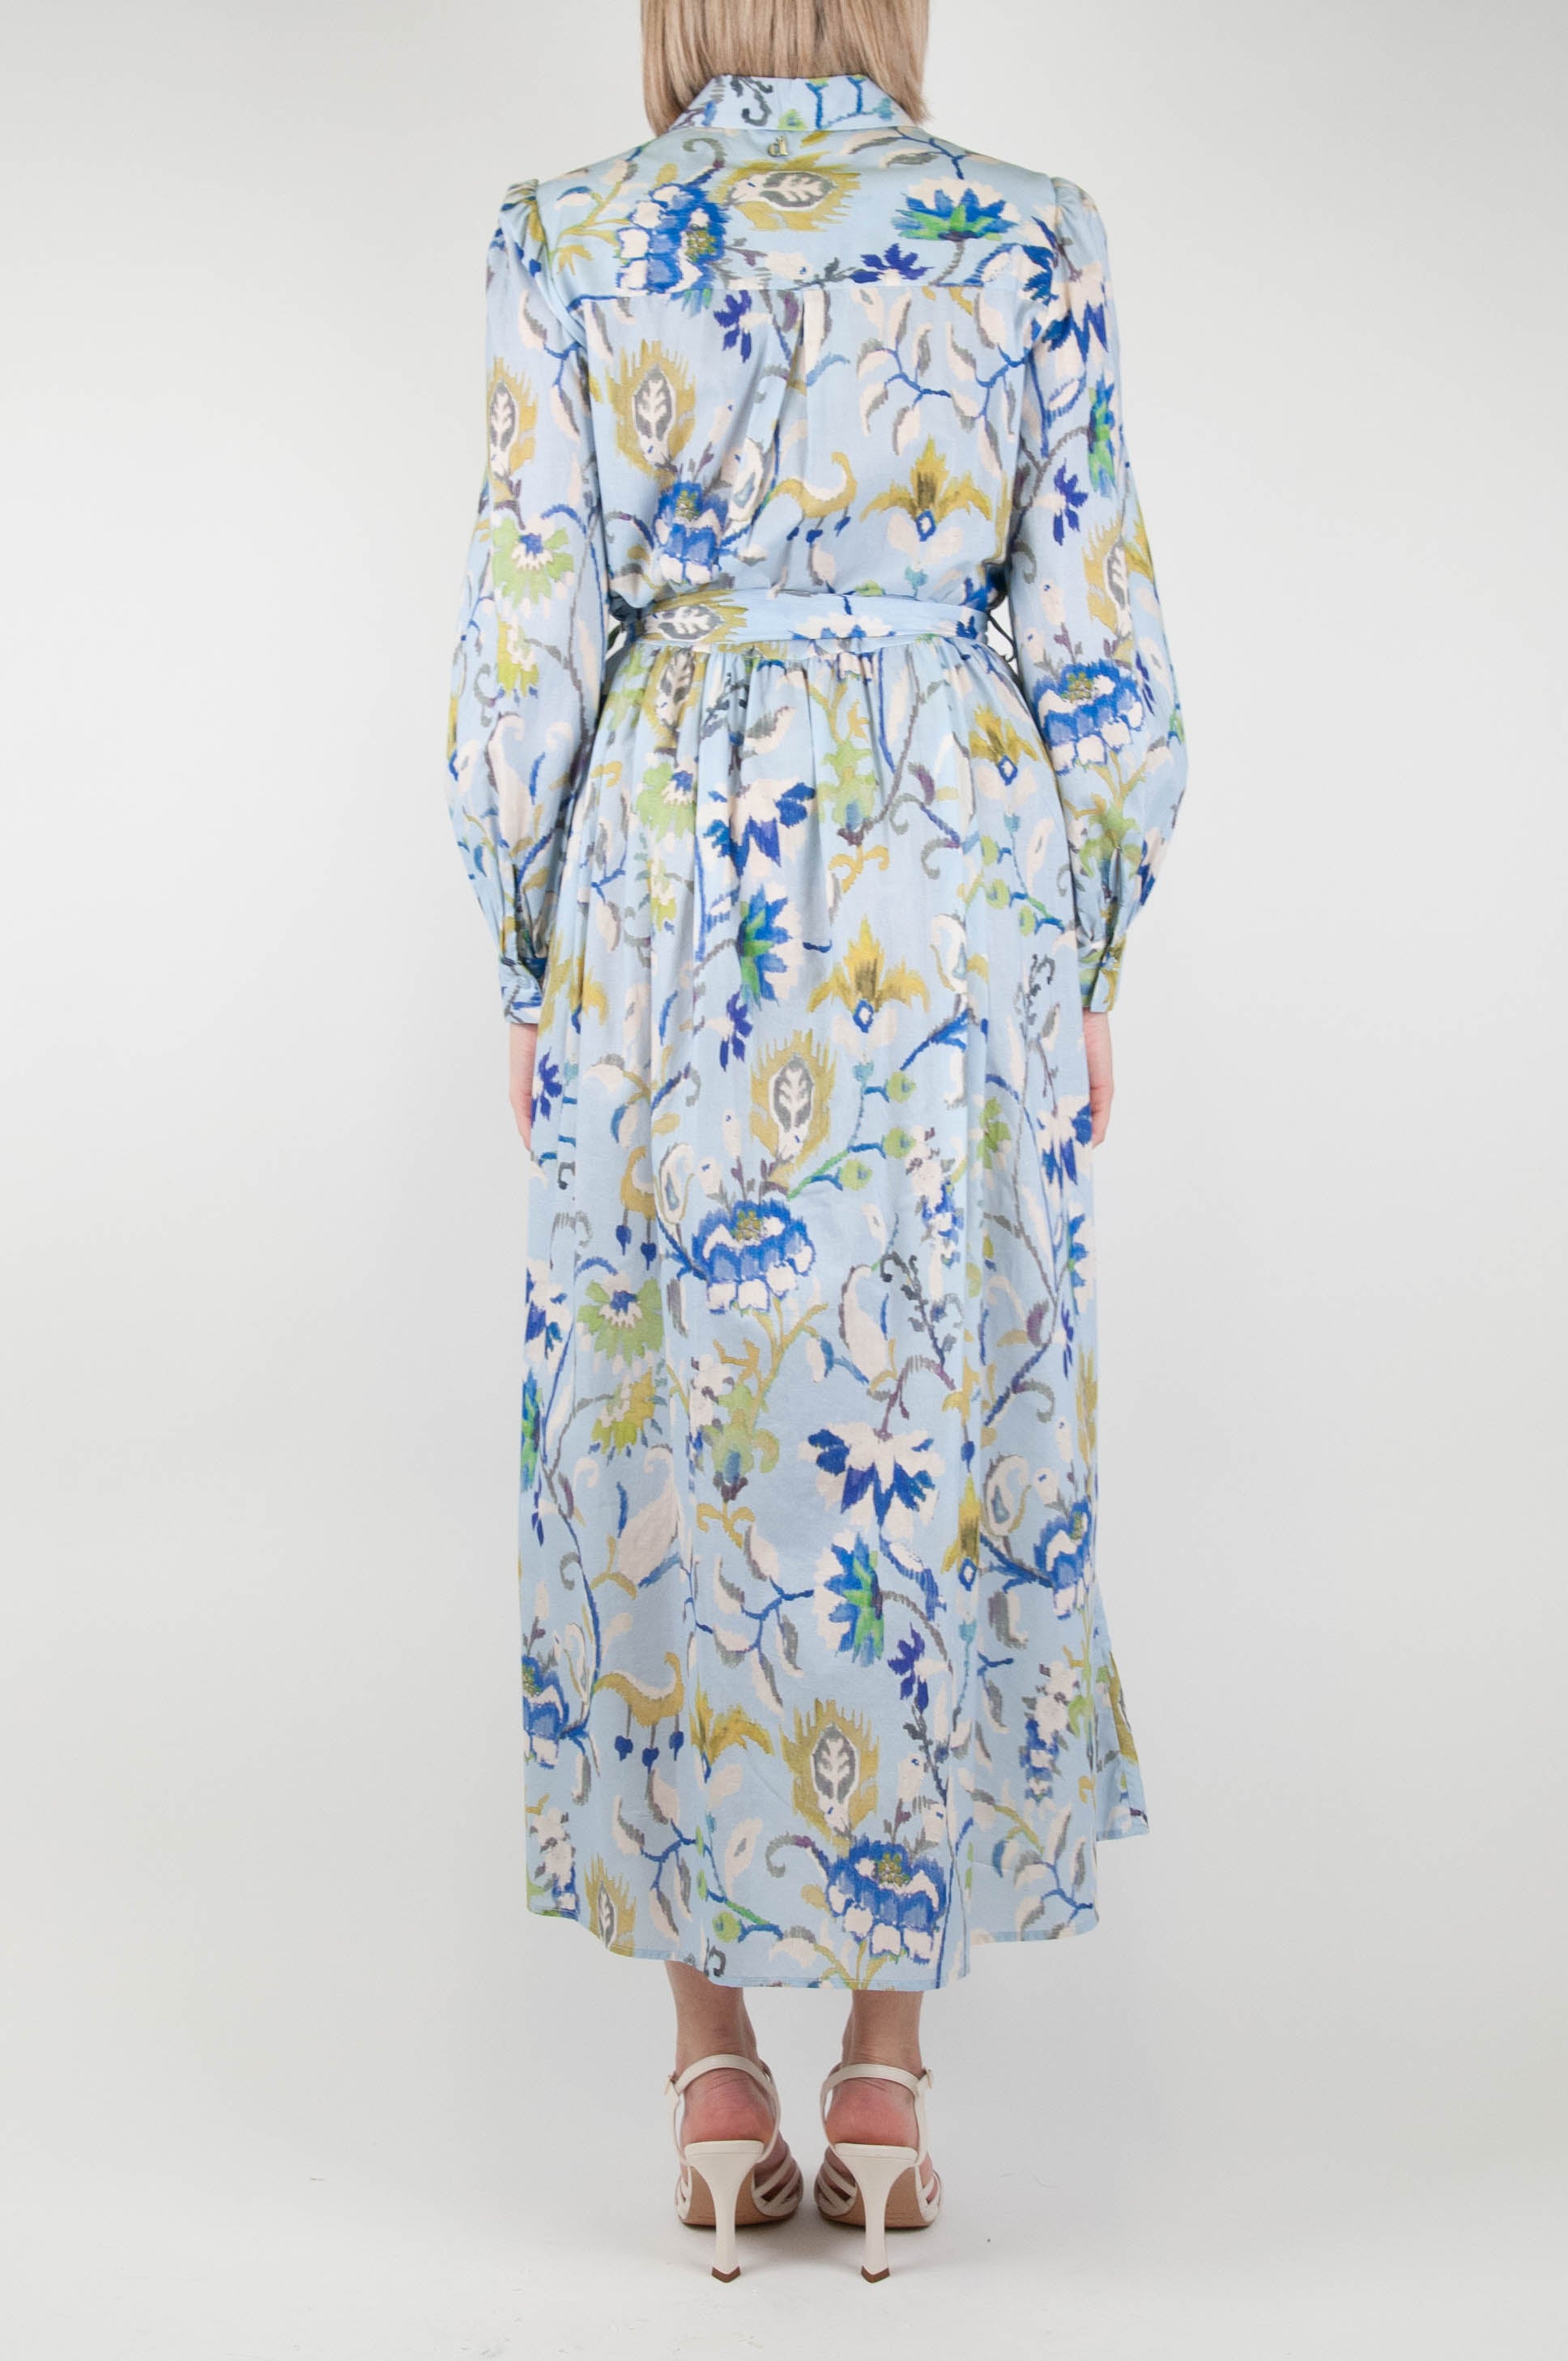 Dixie - Floral patterned shirtdress in cotton muslin with fabric belt